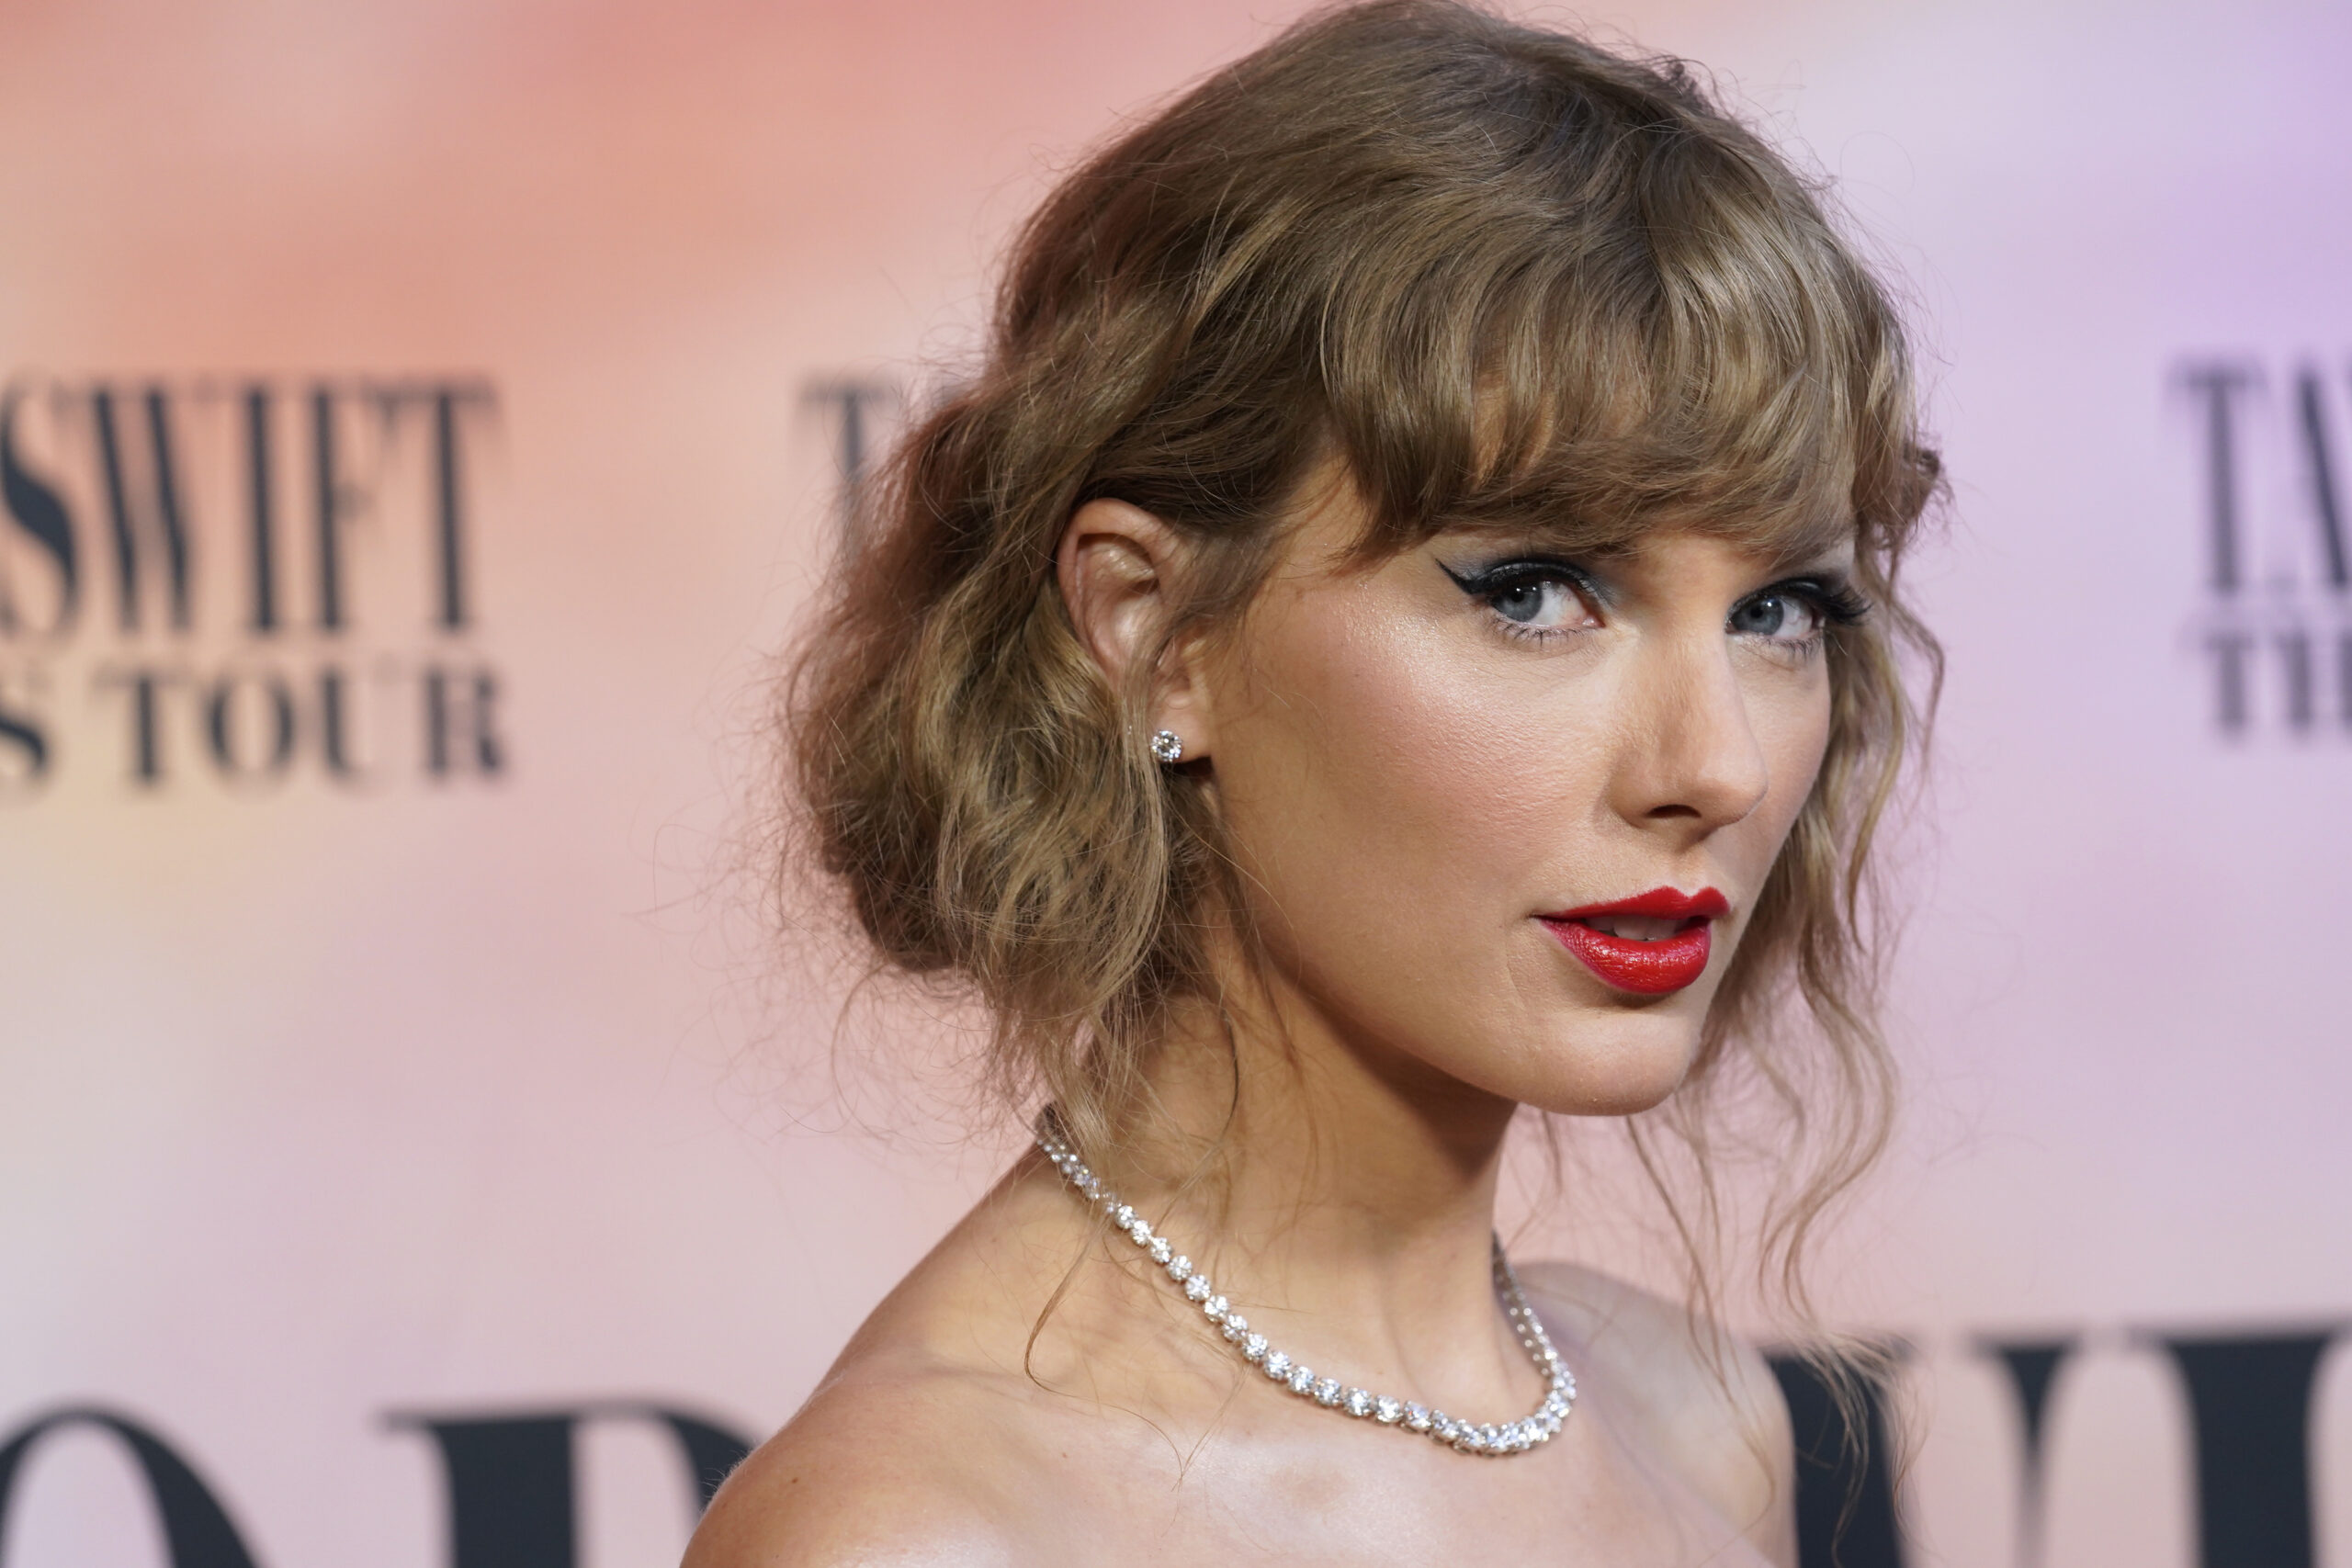 Taylor Swift's Eras Tour concert film to open in North American